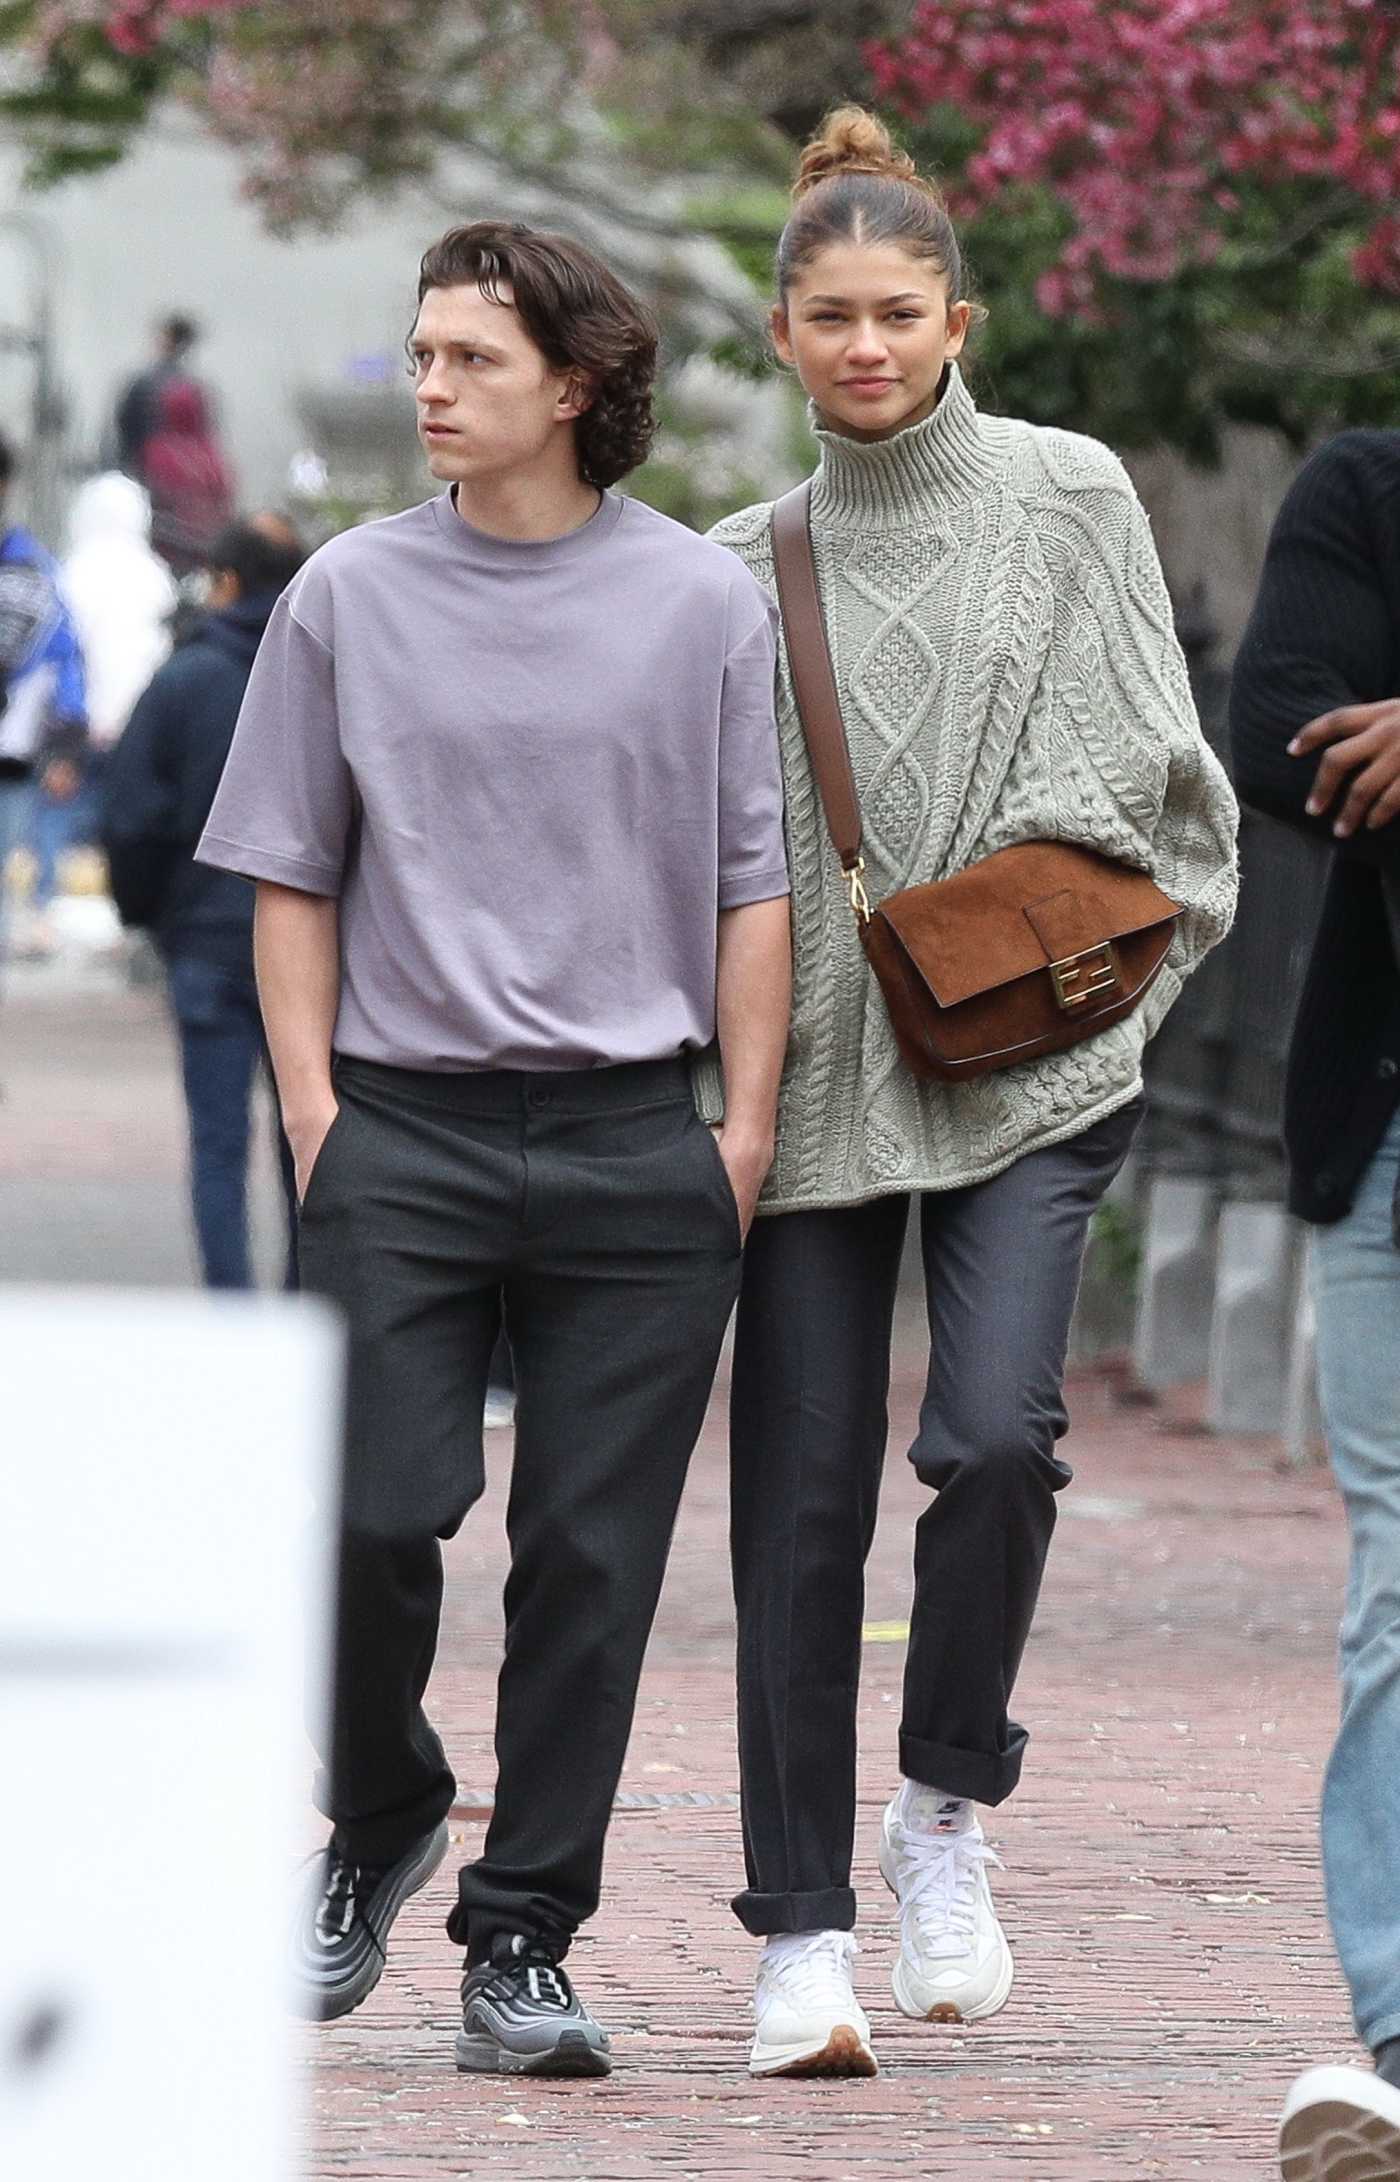 Zendaya in an Olive Knitted Turtleneck Was Seen Out with Tom Holland in Boston 04/25/2022